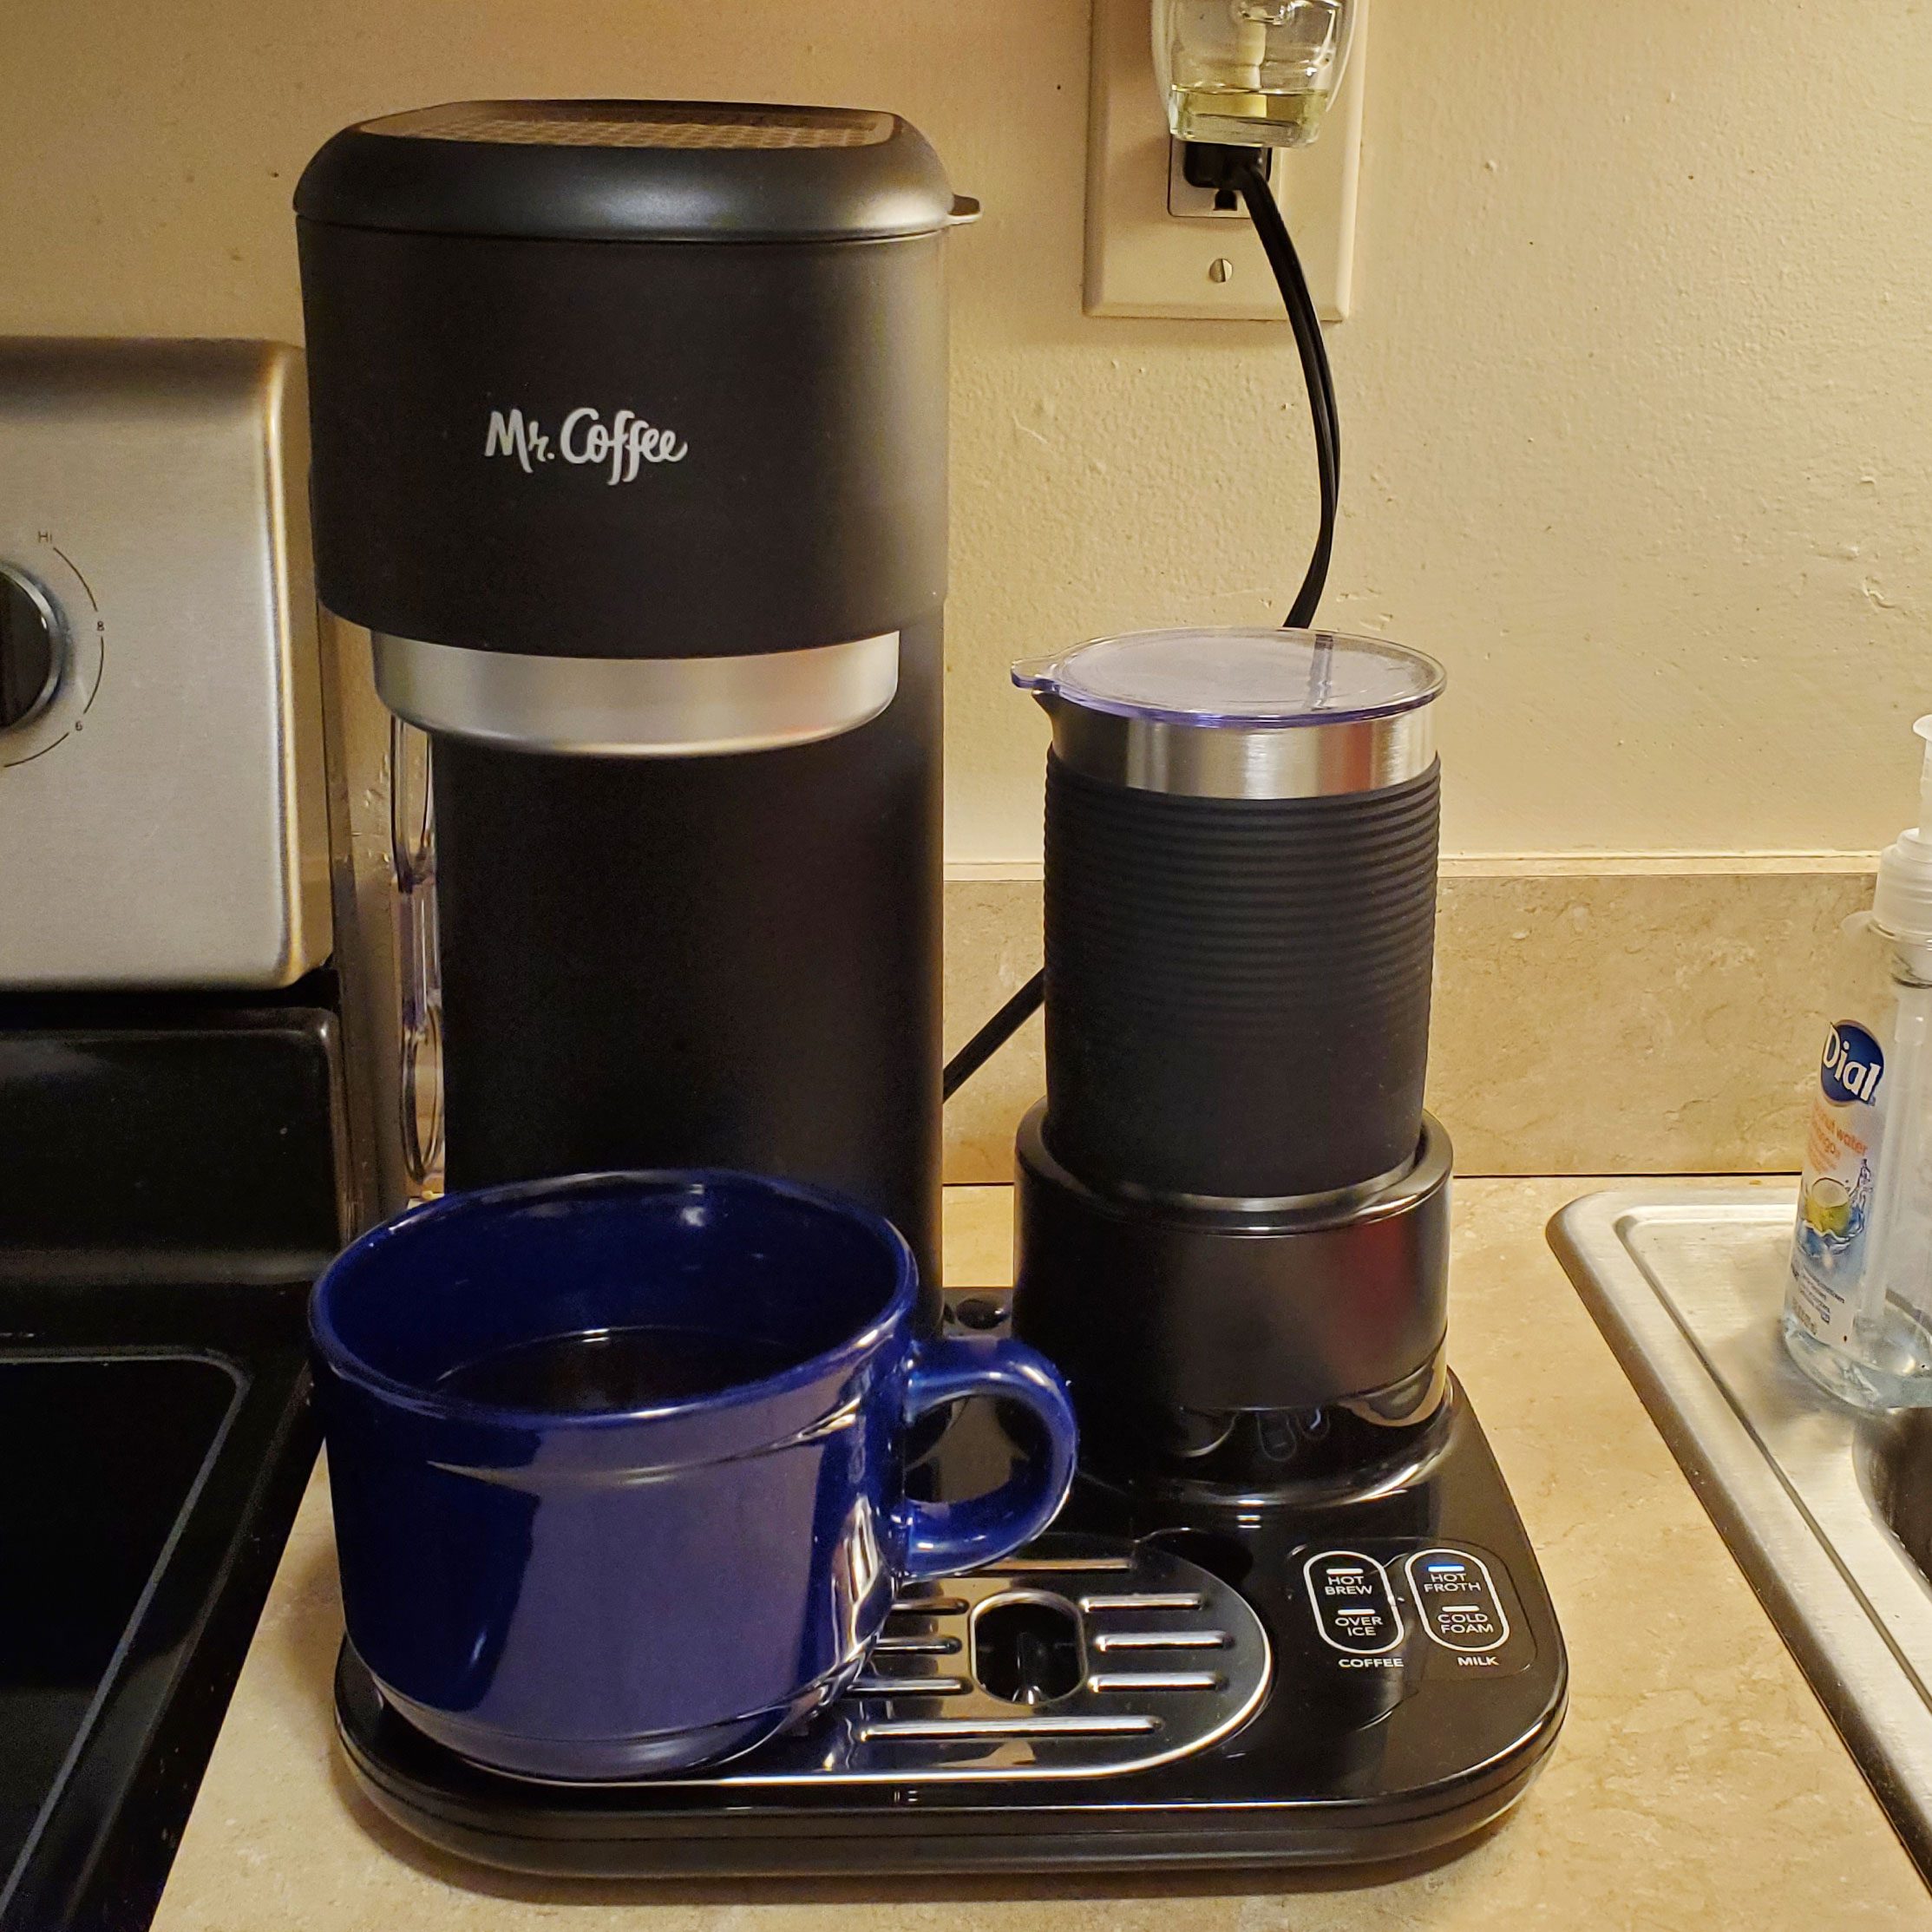 Mr. Coffee 4-in-1 Single-Serve Coffee Maker Review